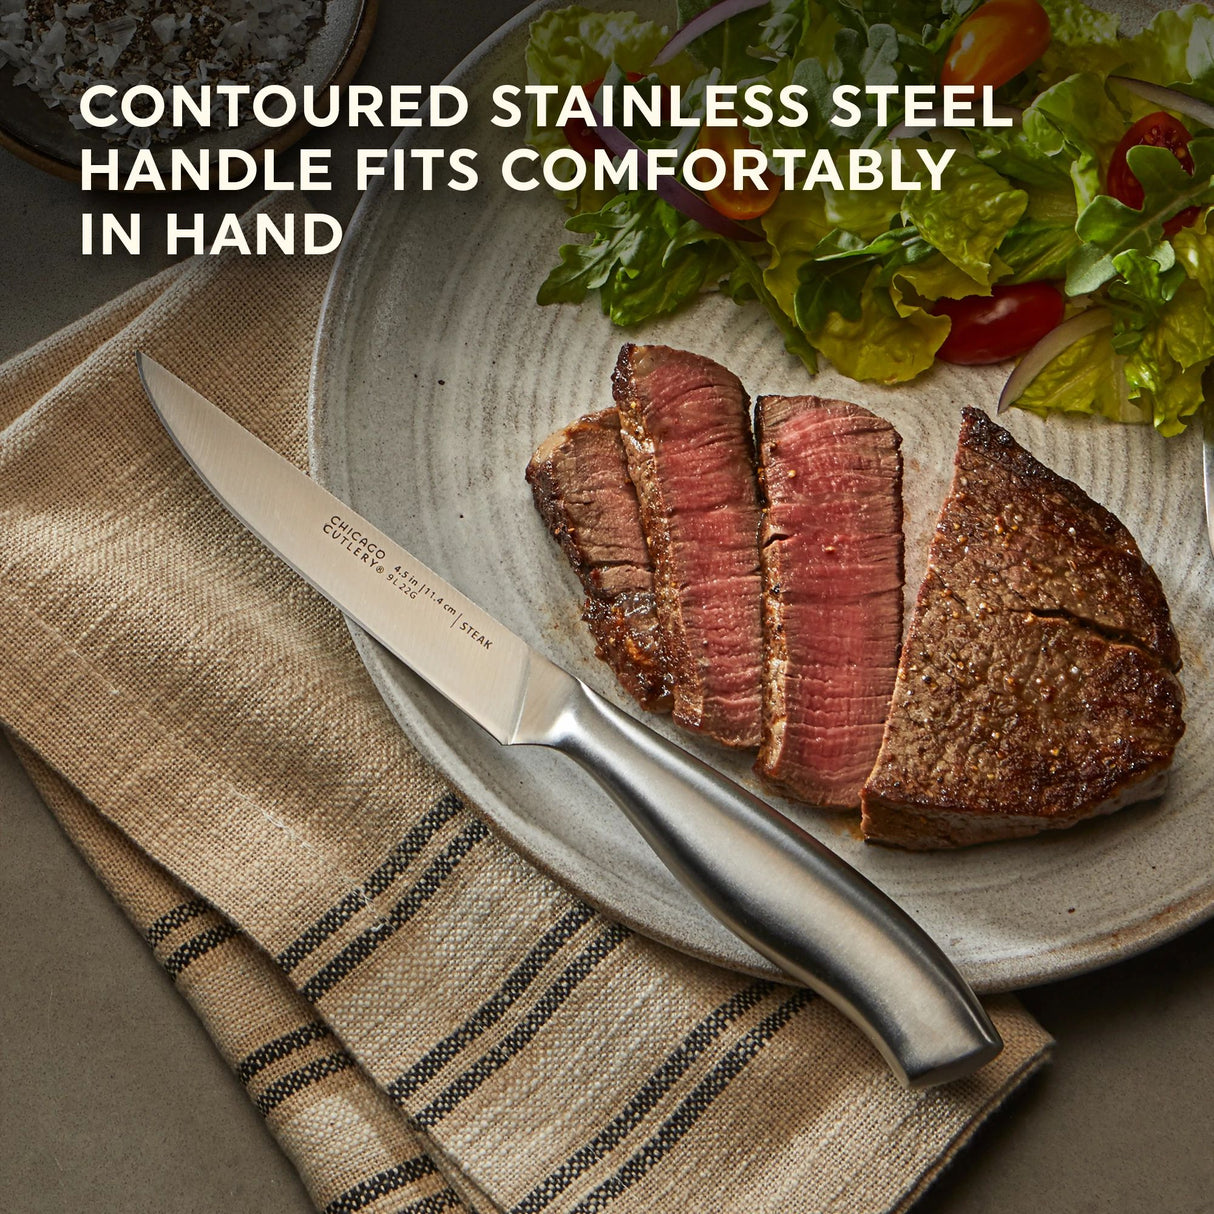  Insignia Steel Steak Knife Set on plate with text contoured stainless steel handle fits comfortably in hand